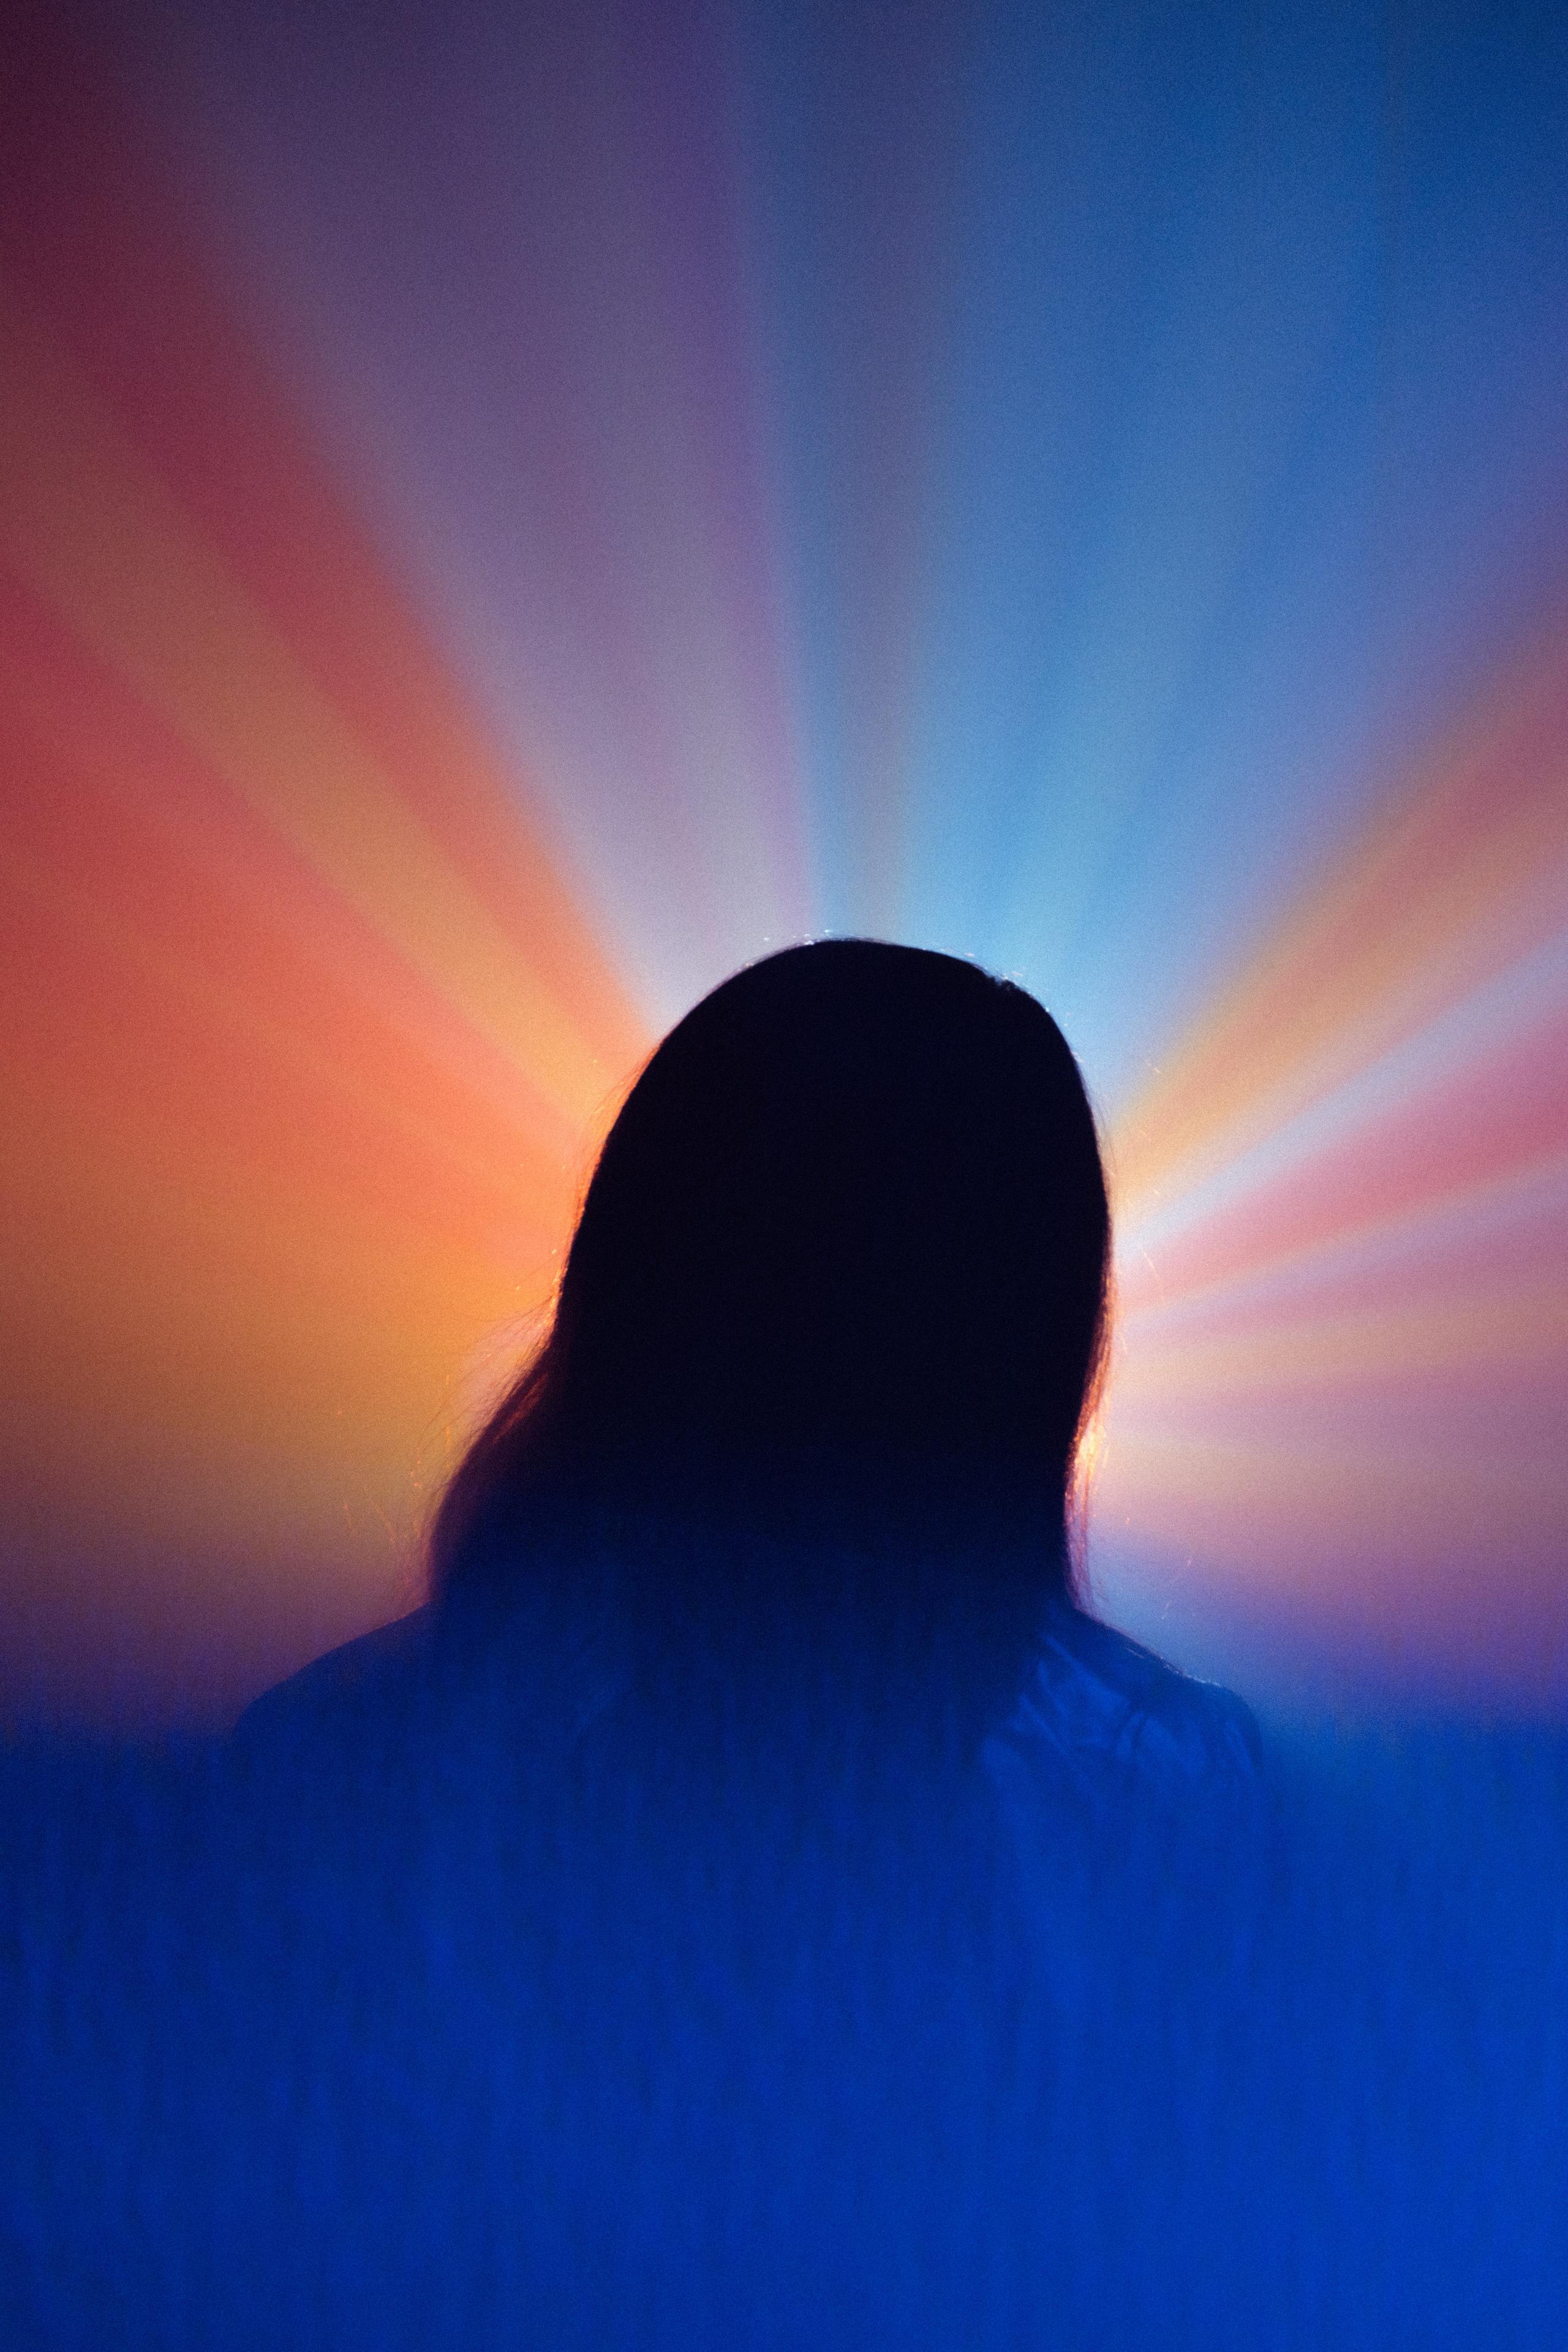 A person's head and shoulders, viewed from behind, with bright rays of colored light forming an aura.